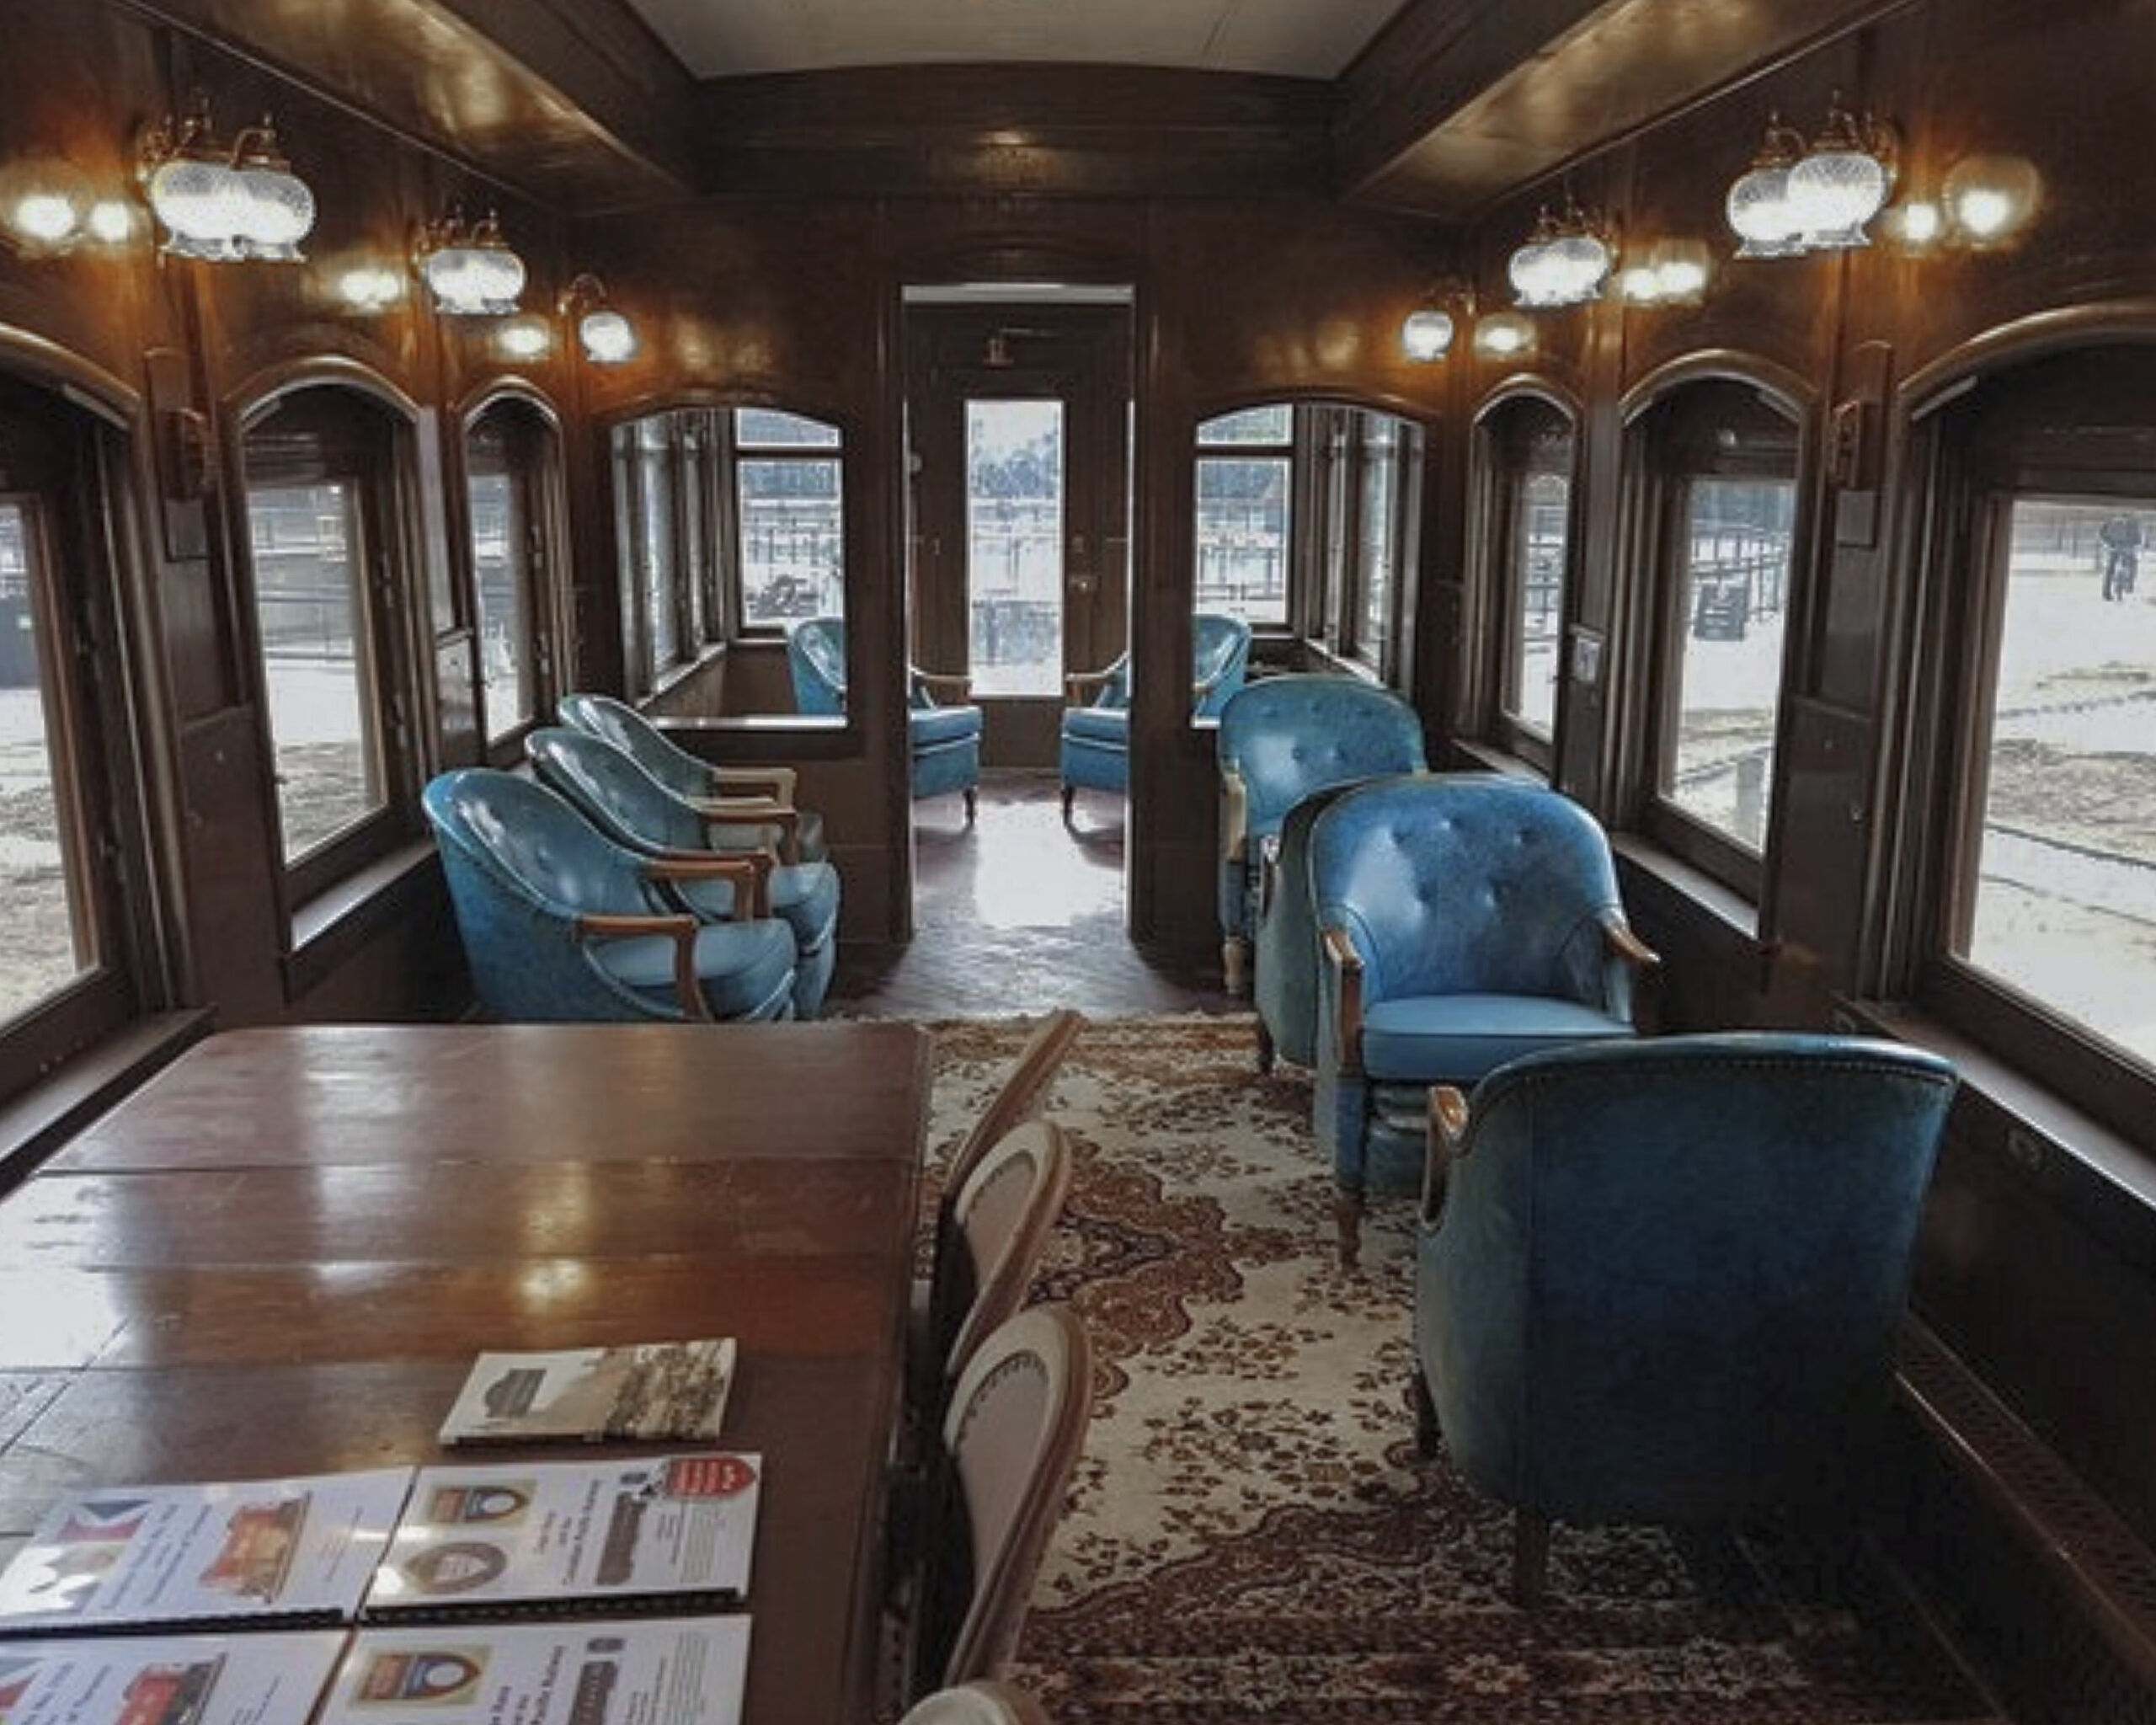 Cape Race is a 1929 solarium-lounge car built in 1929 for the Canadian Pacific Railway. Toronto Railway Museum volunteers worked extensively on this car in 2020.